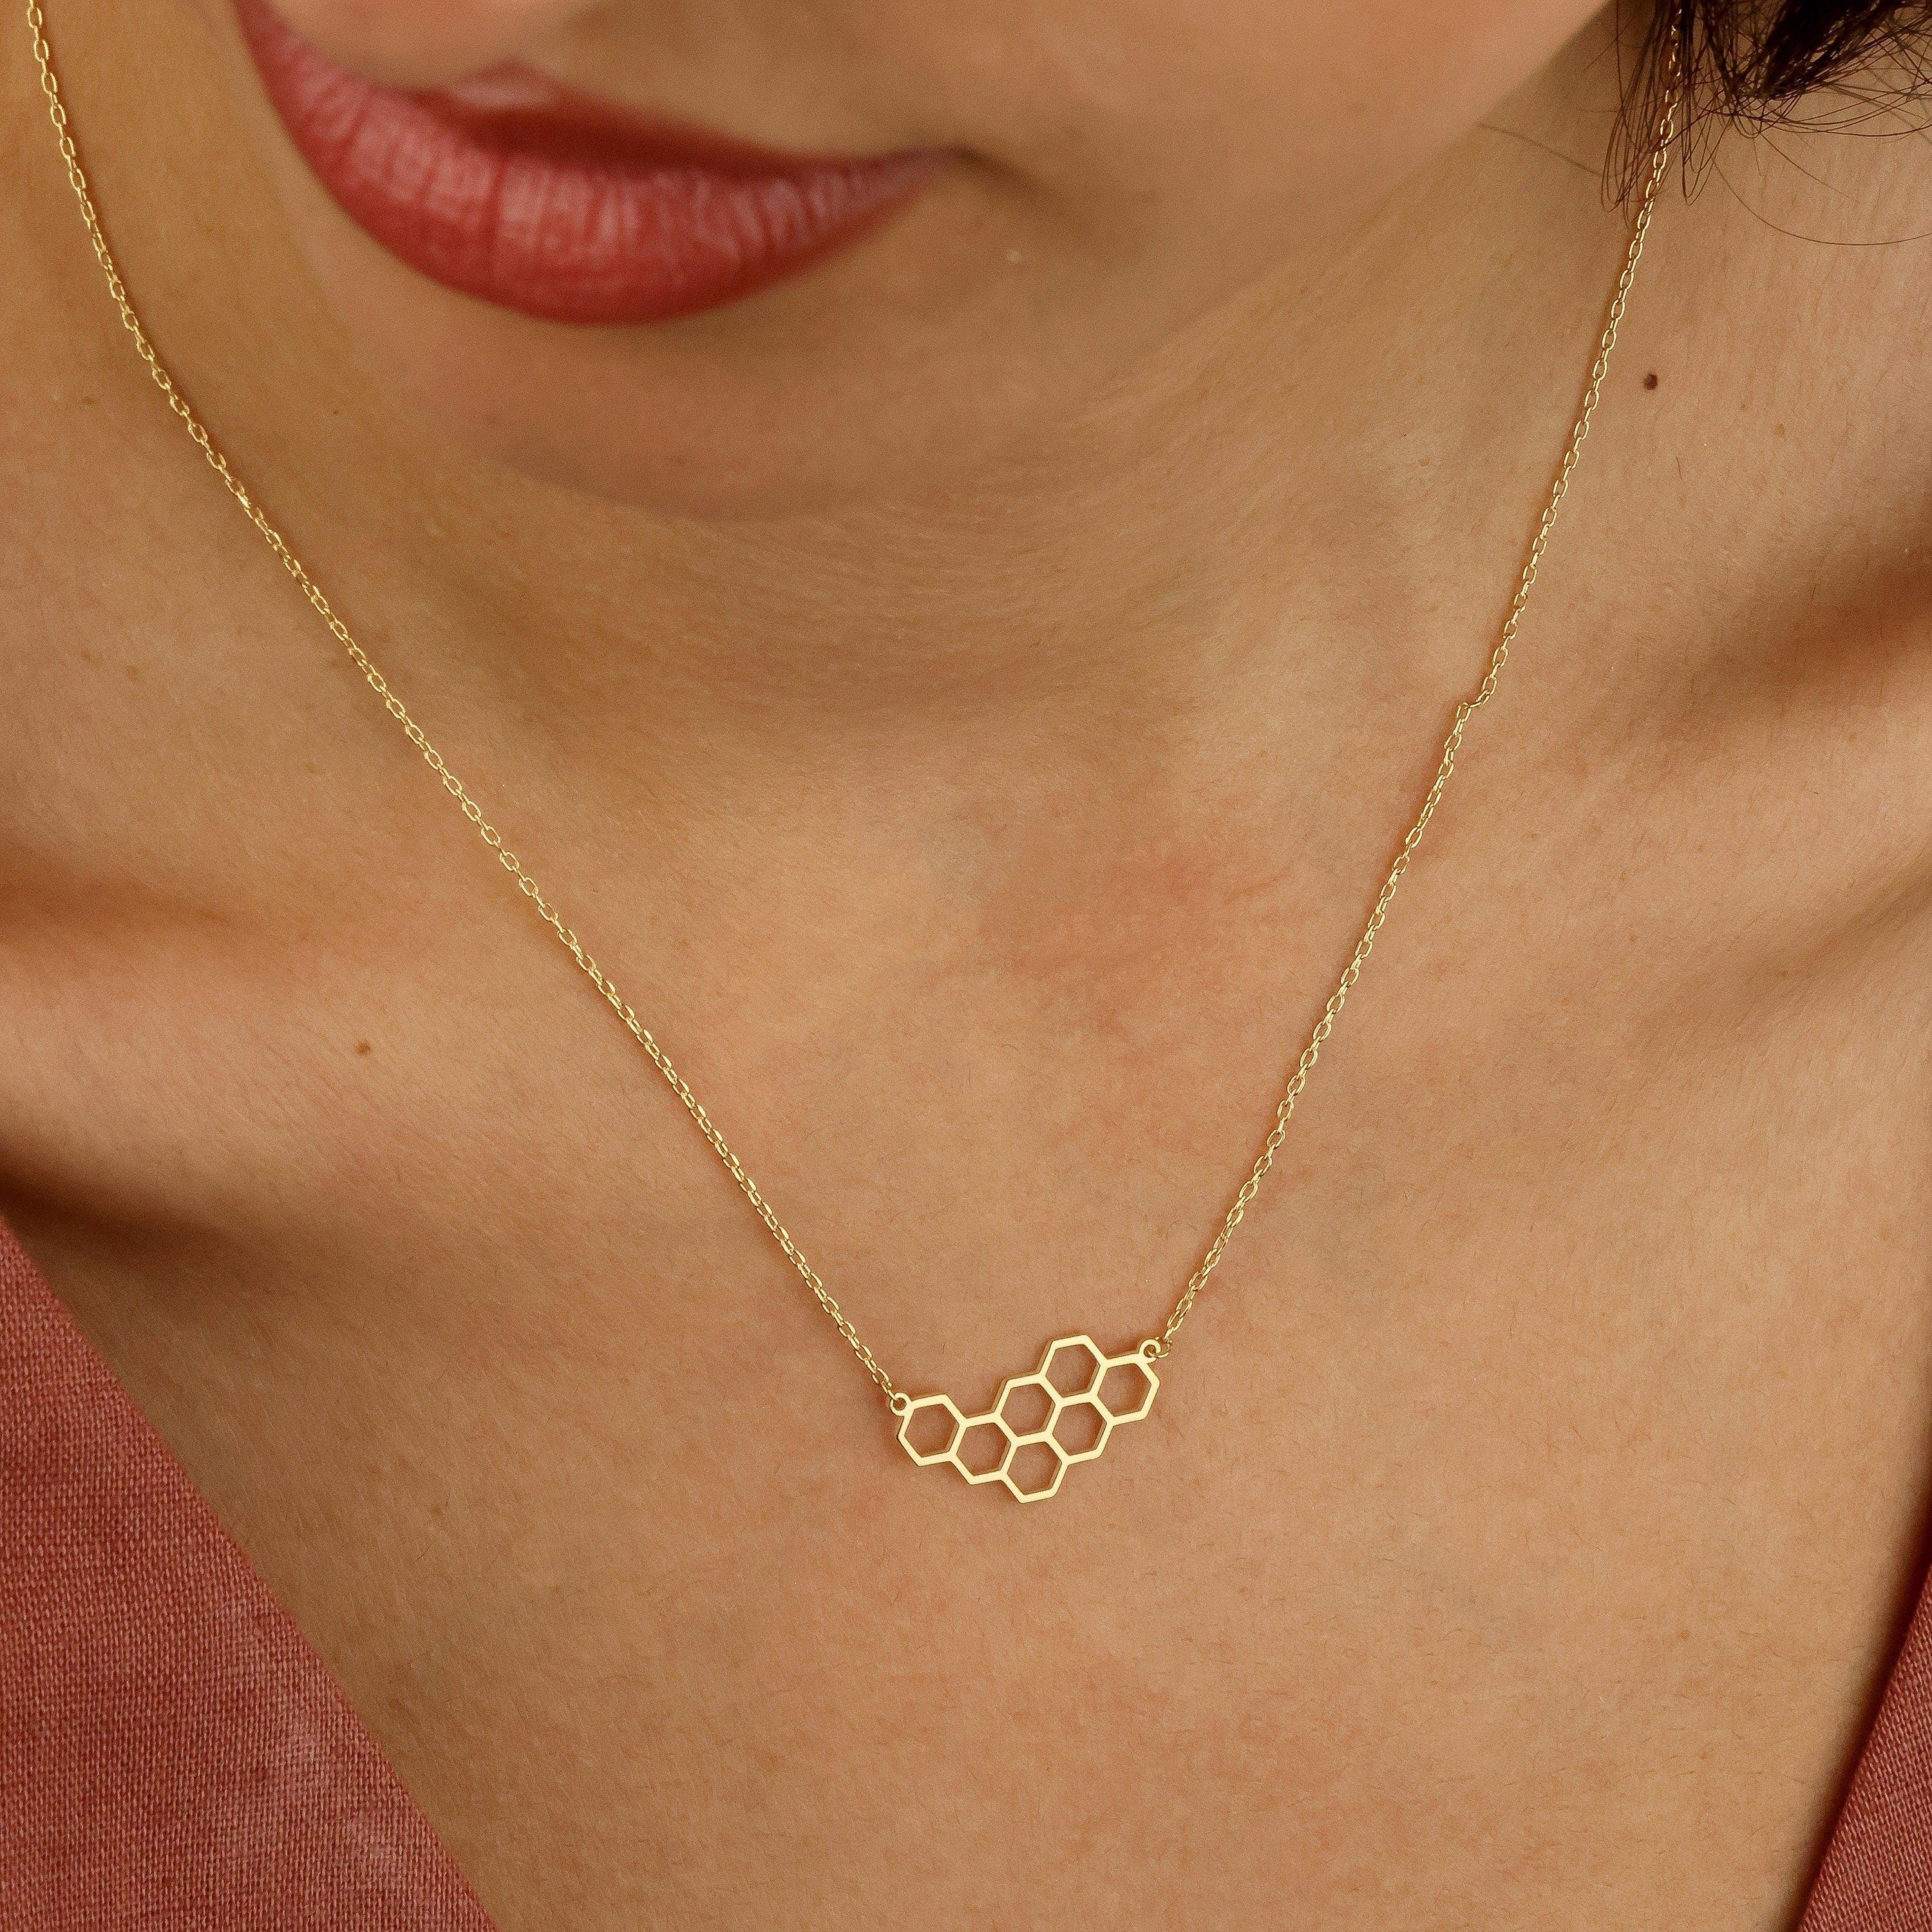 Honeycomb Necklace, Geometry Shape, Layering Necklace, Birthday Necklace, Gift for Her, Christmas Gift,